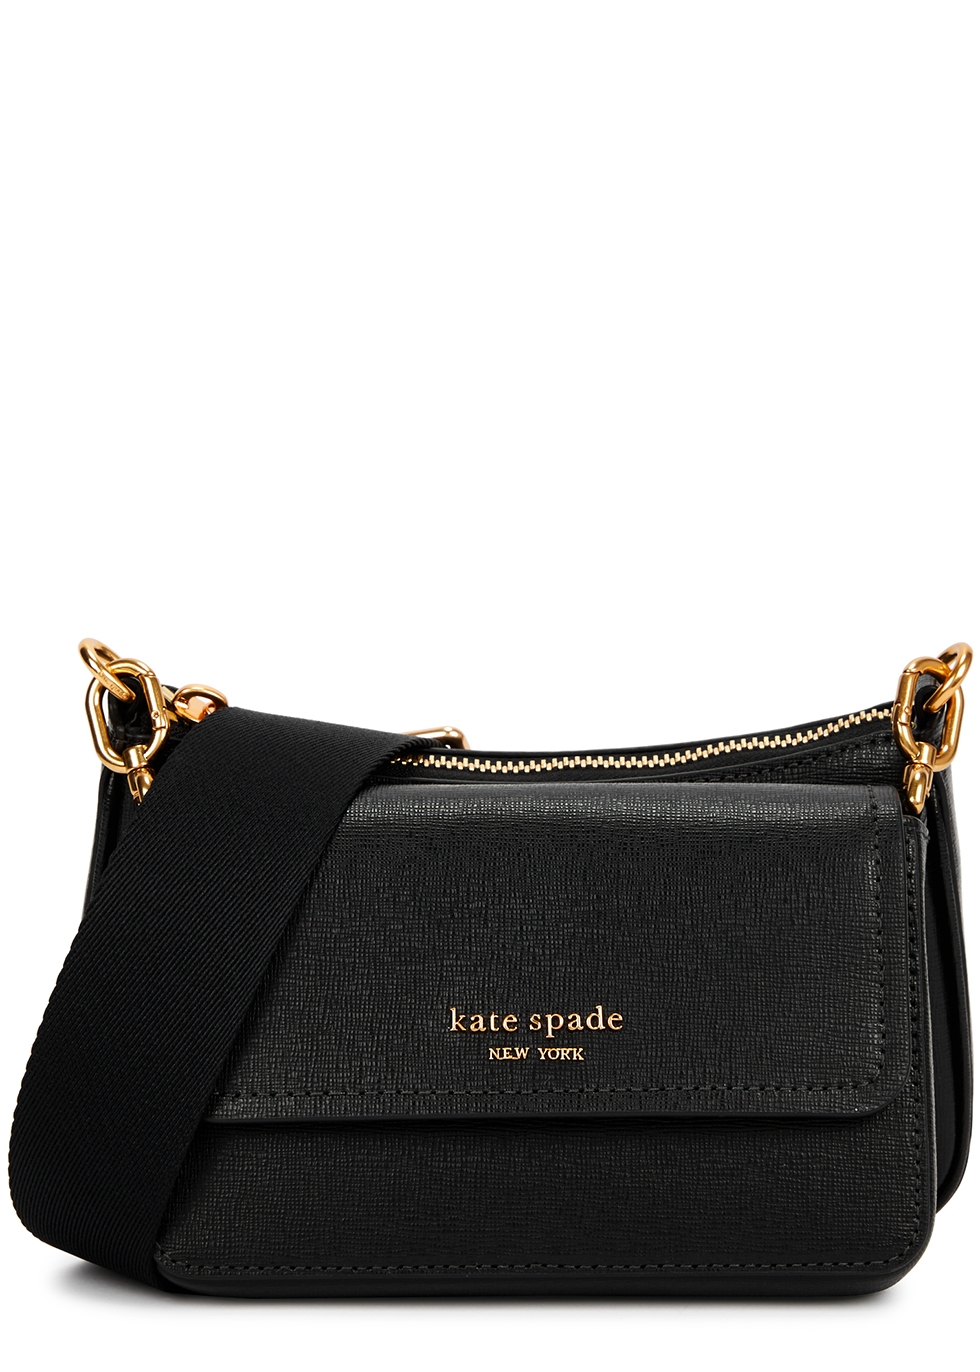 New purse collections Tory Burch Kate Spade Coach Outlet release new  products  clevelandcom